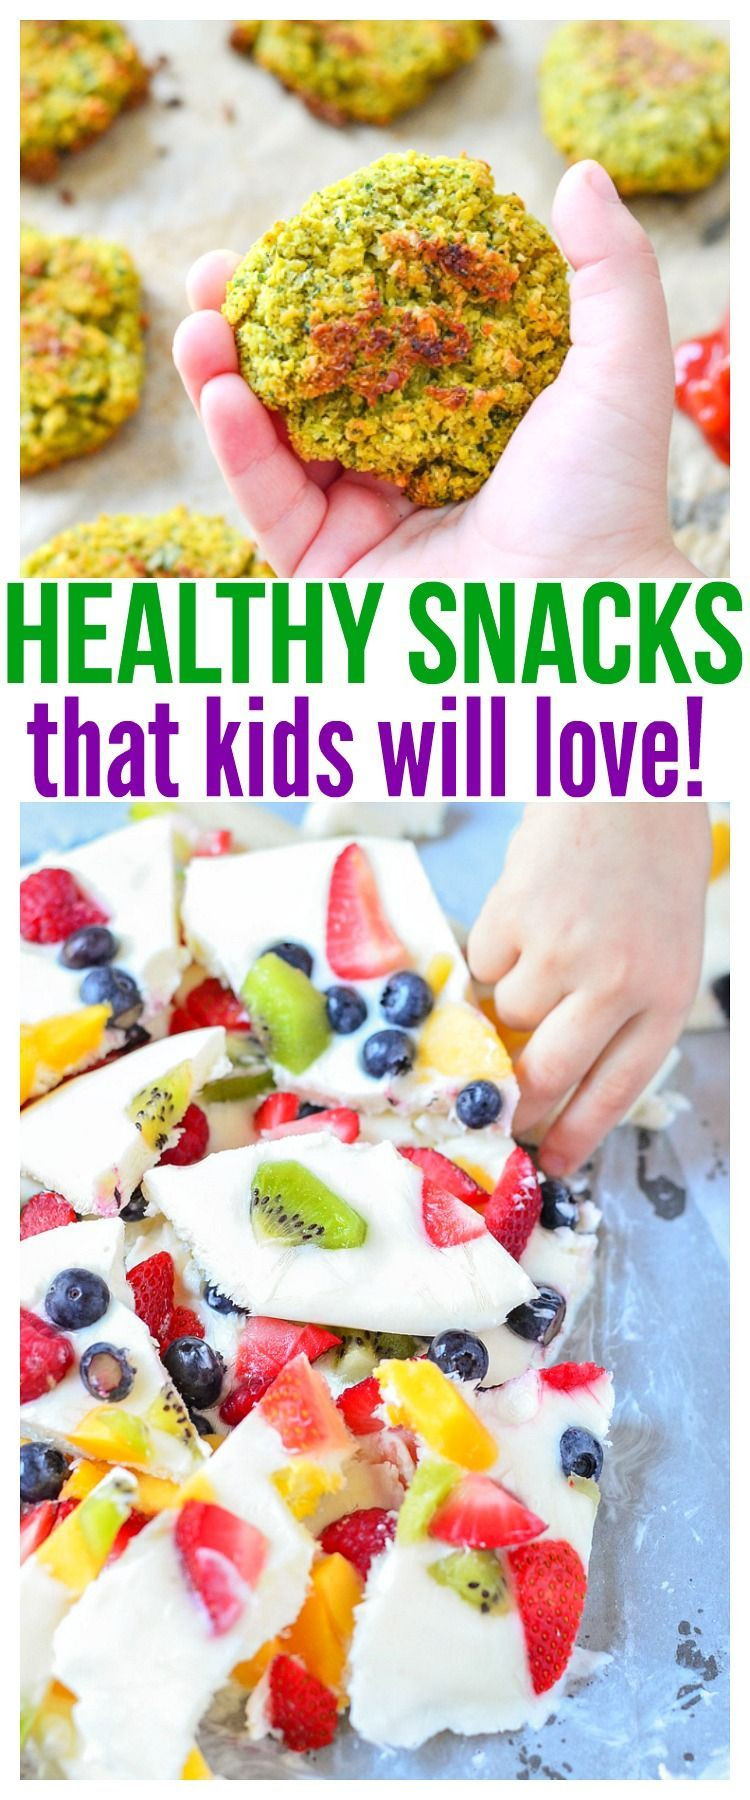 Healthy Snacks For Kids On The Go
 Whether you re looking for healthy snacks for kids on the